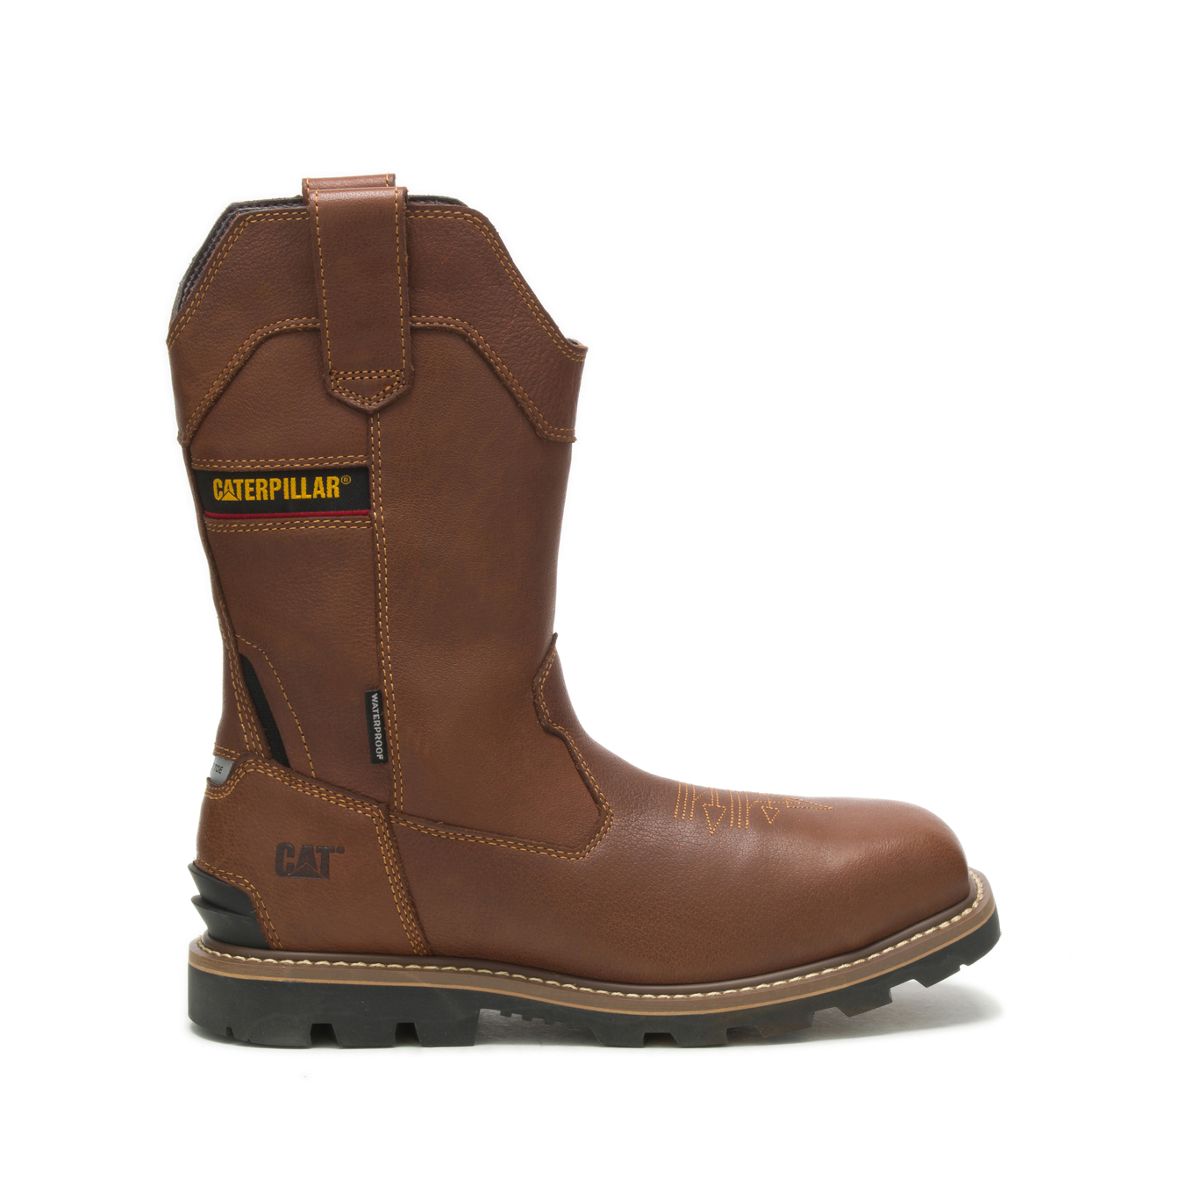 Cylinder Waterproof Pull-On Composite Toe Work Boot, Caramel, dynamic